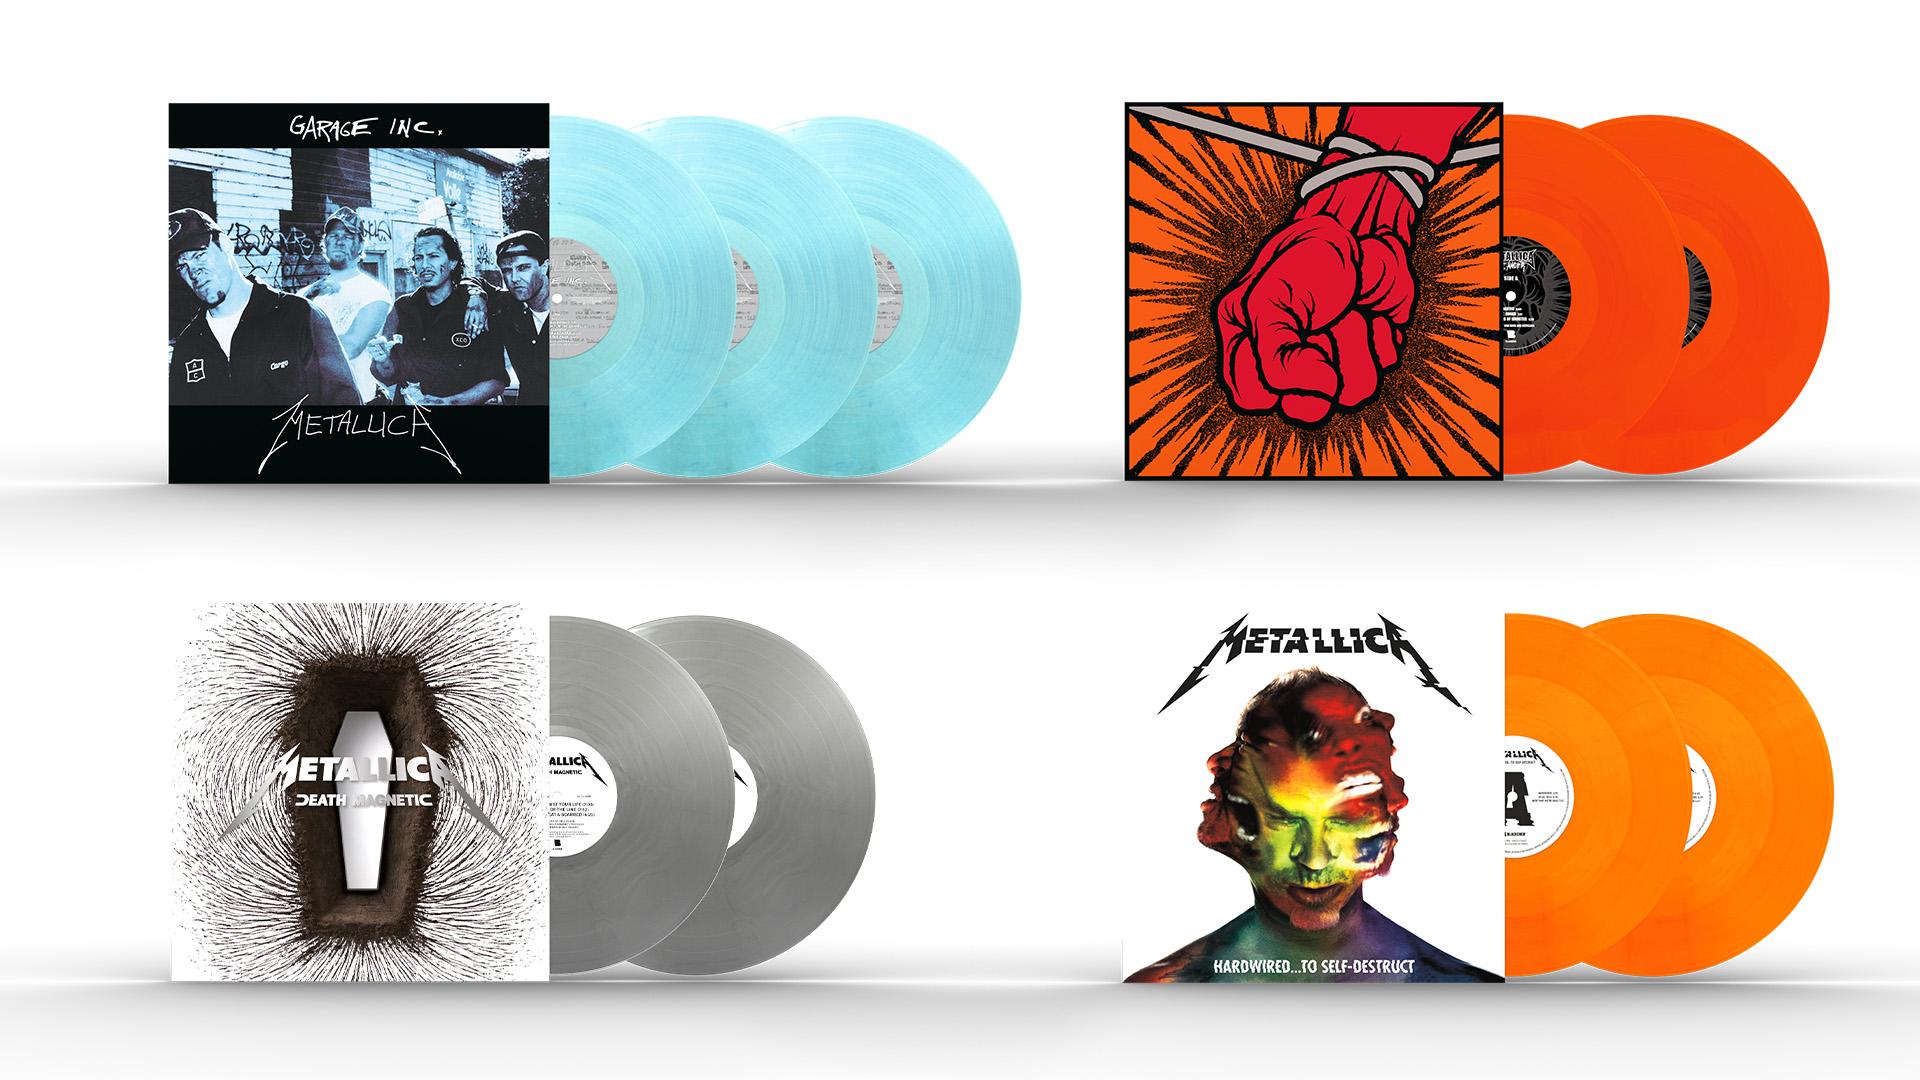 Four More Colored Vinyl Releases Coming Soon Outside the U.S.